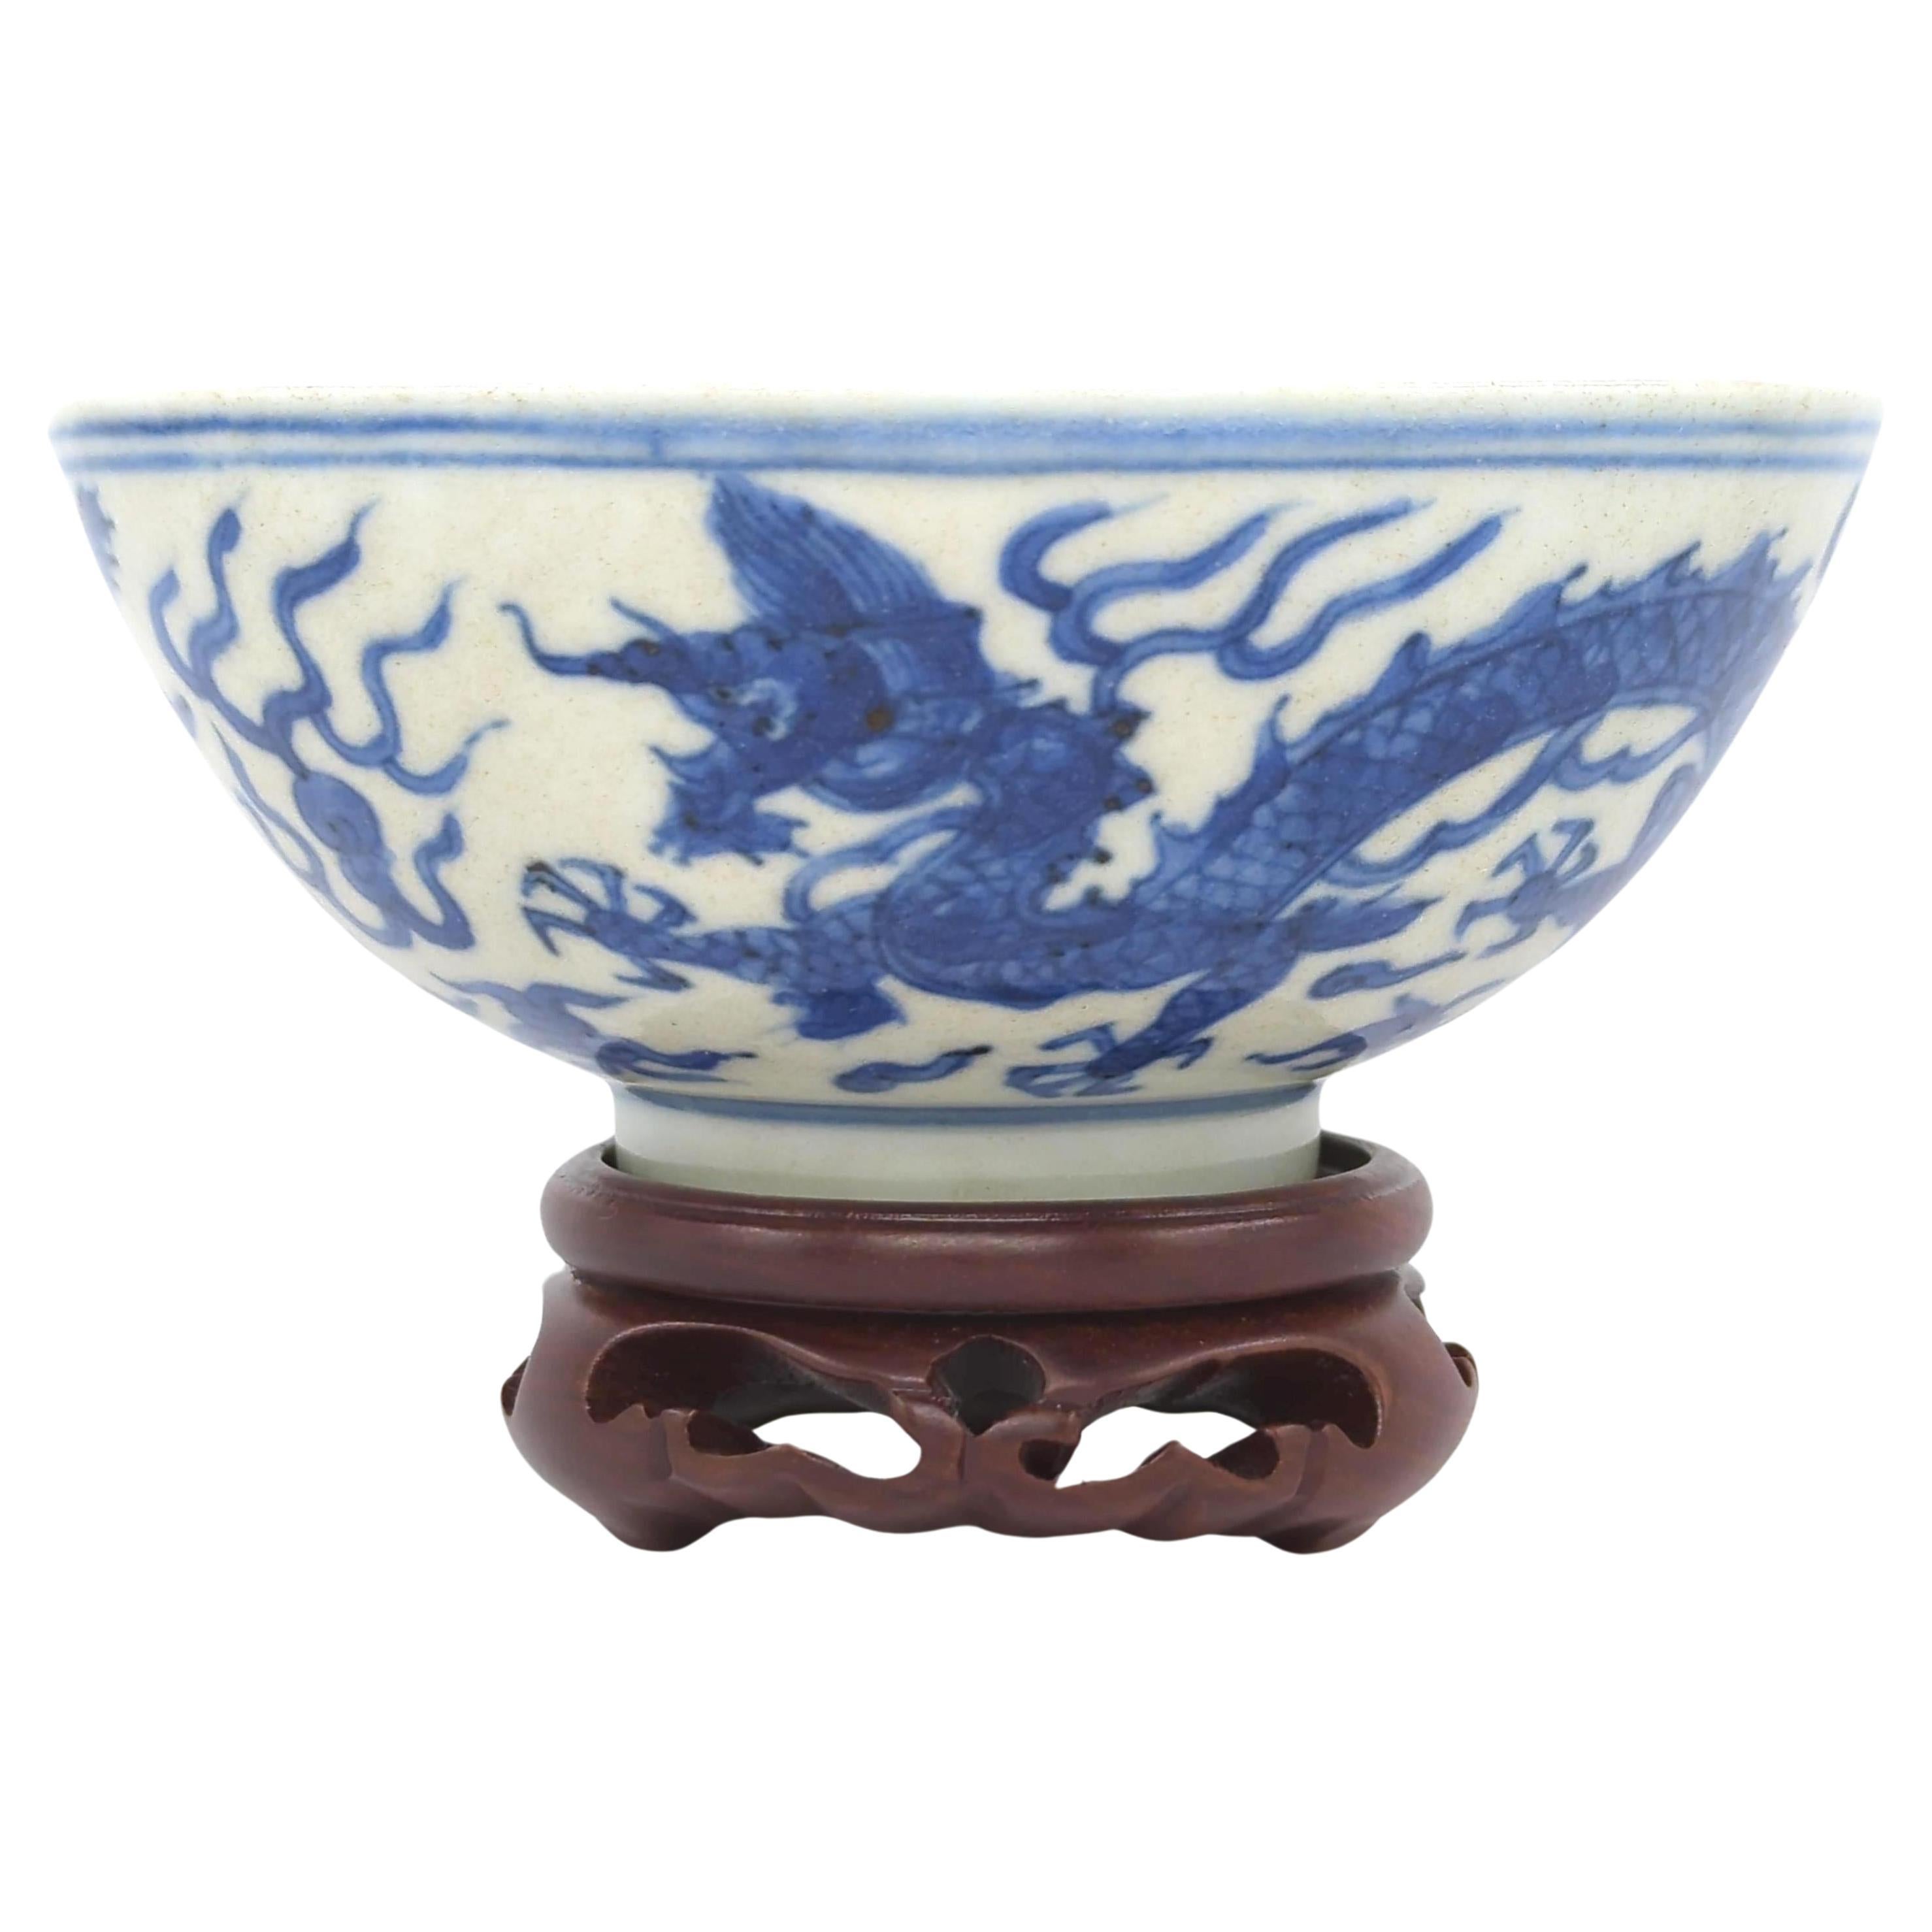 This exceptional blue and white dragon bowl, dating back to the late Ming Dynasty, is a remarkable piece from  an unique period in Chinese porcelain manufacturing known as 